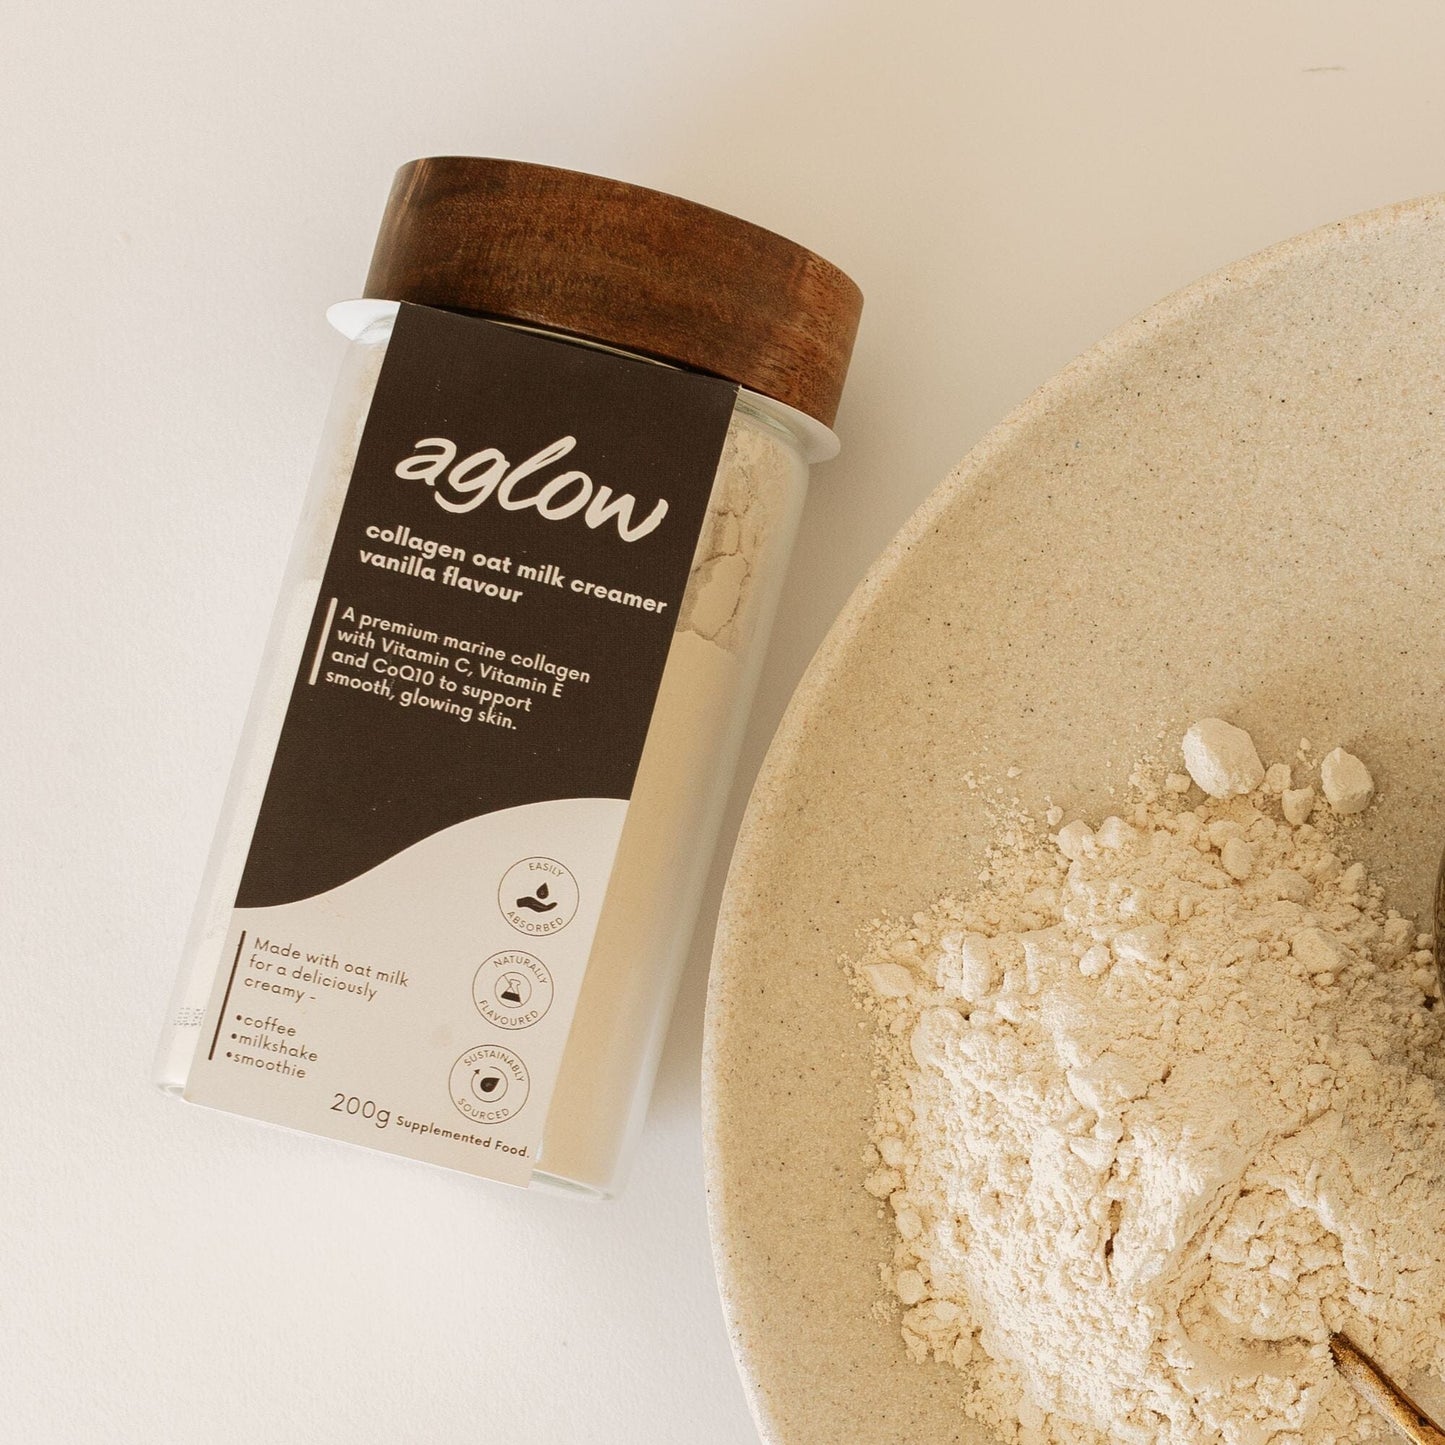 Reasons to LOVE our new Collagen powders